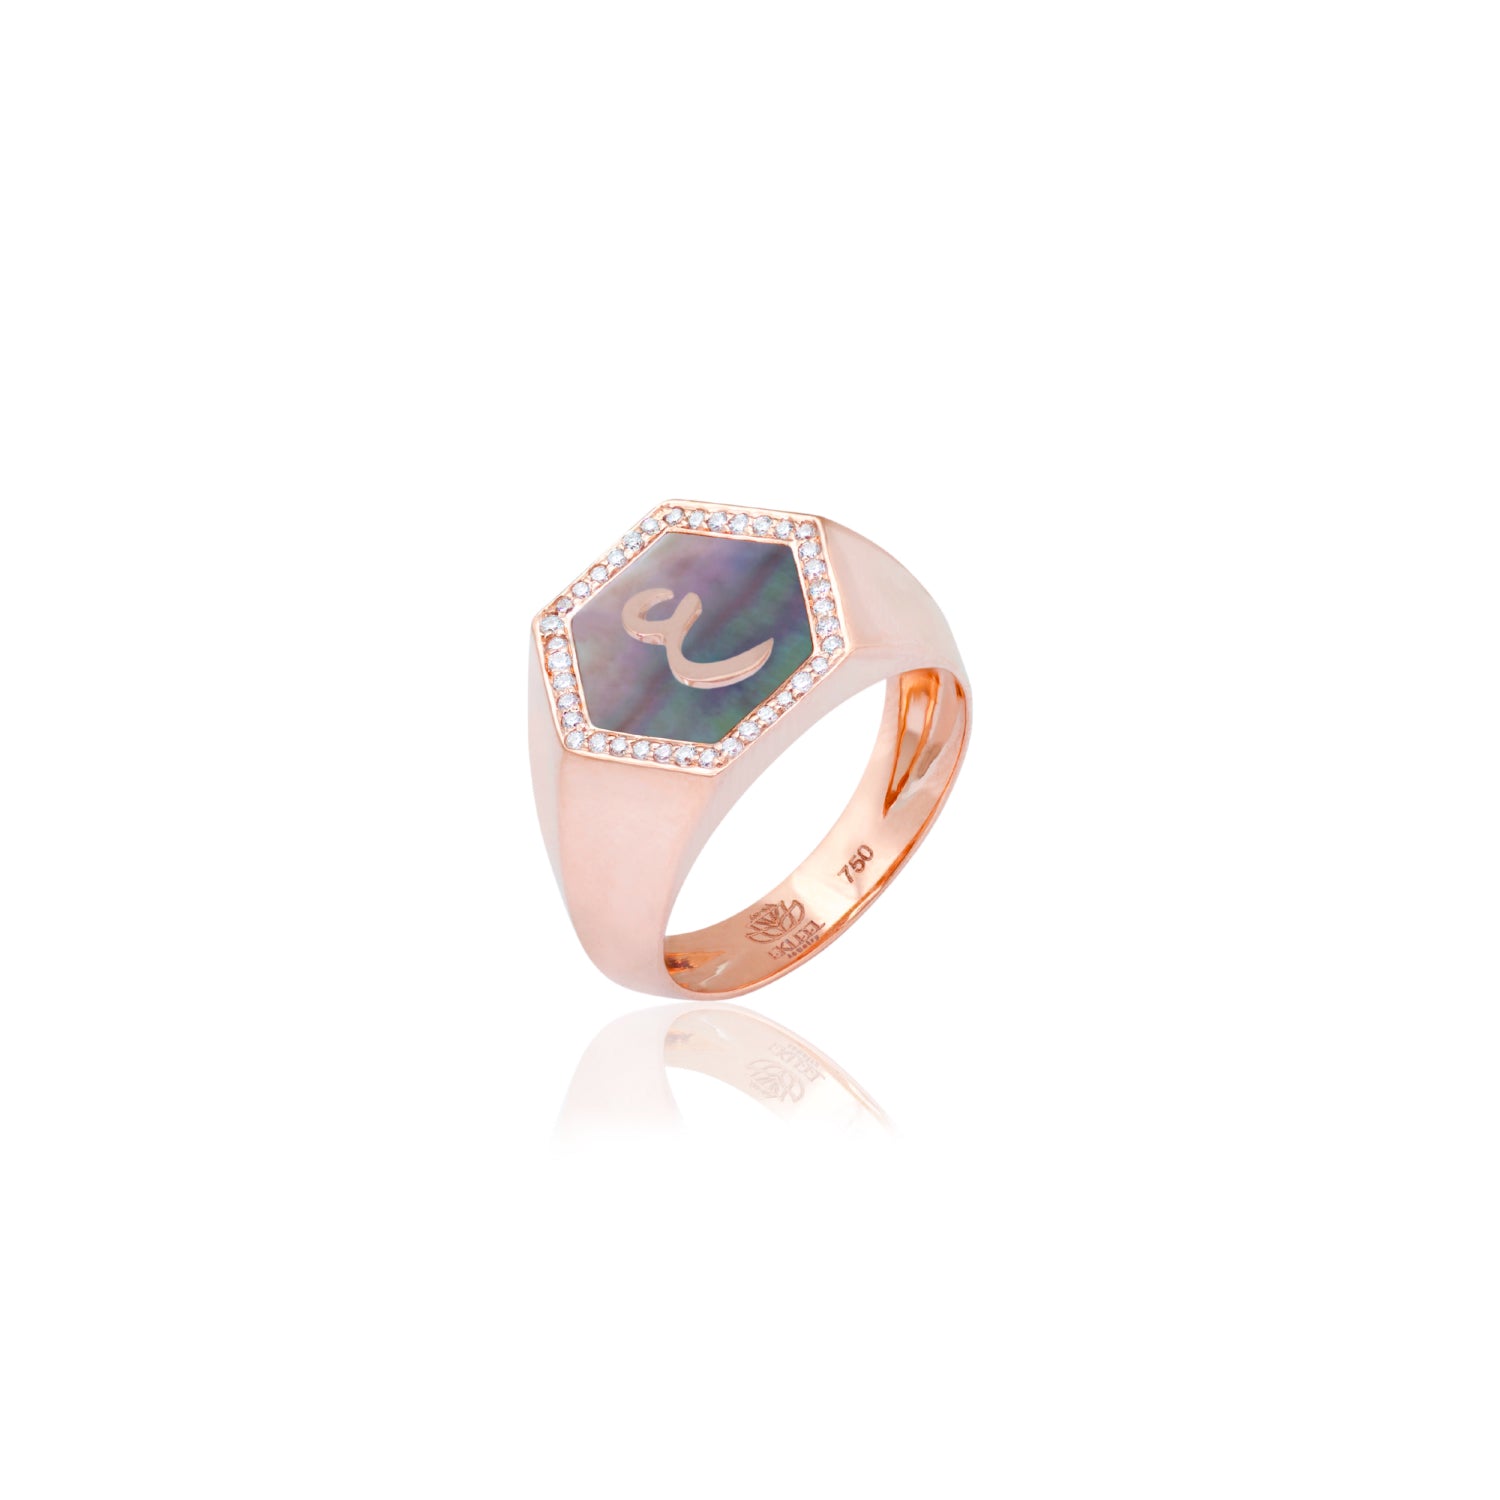 Qamoos 2.0 Letter ع Black Mother of Pearl and Diamond Signet Ring in Rose Gold